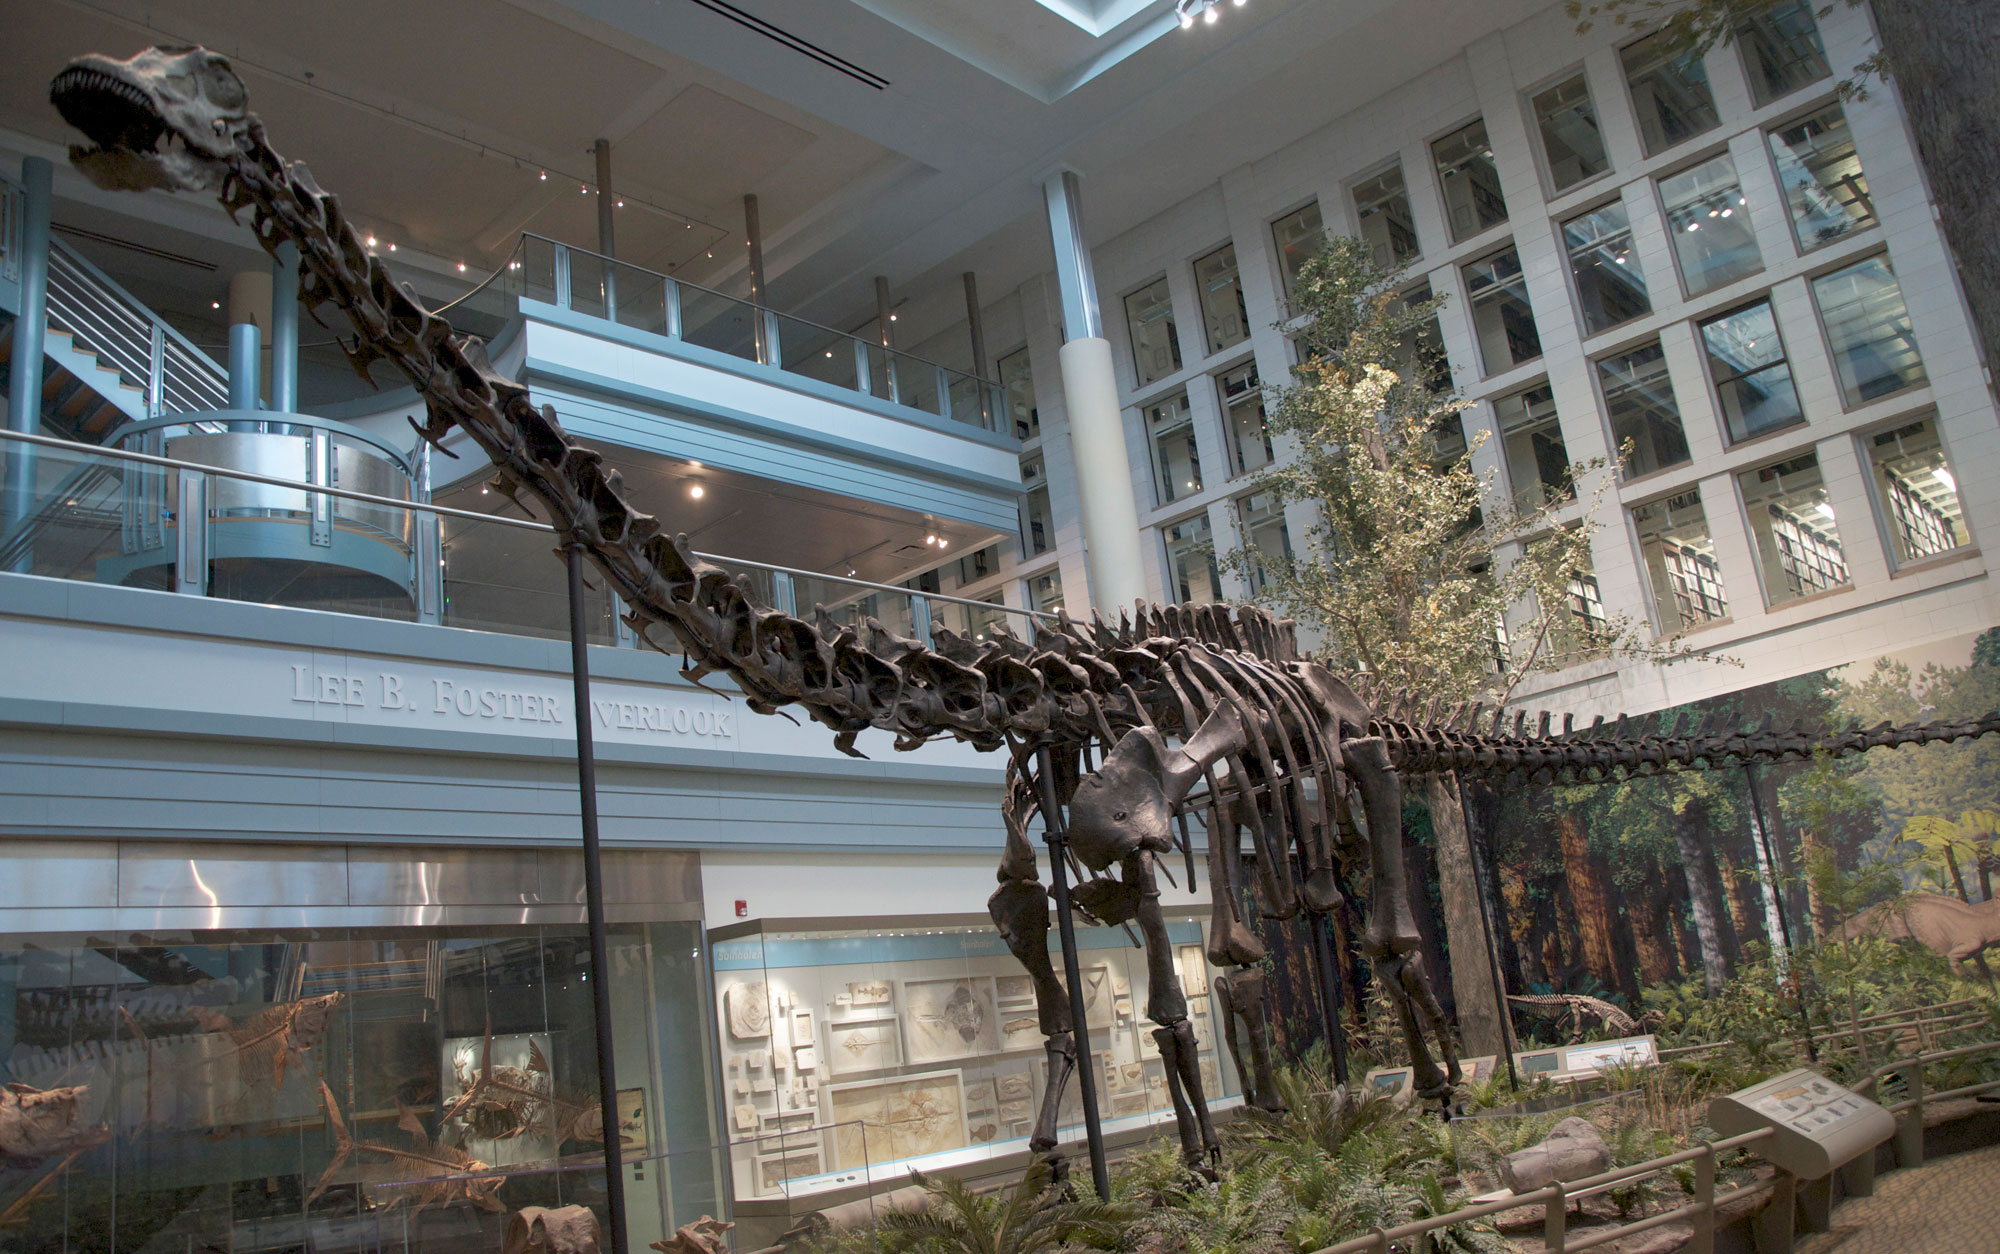 Photograph of a skeleton of a Diplodocus carnegii, a sauropod from the Morrison Formation of Wyoming, on display in a museum. The photo shows a long-necked dinosaur skeleton standing on four legs. The dinosaur's long tail is held off the ground. 